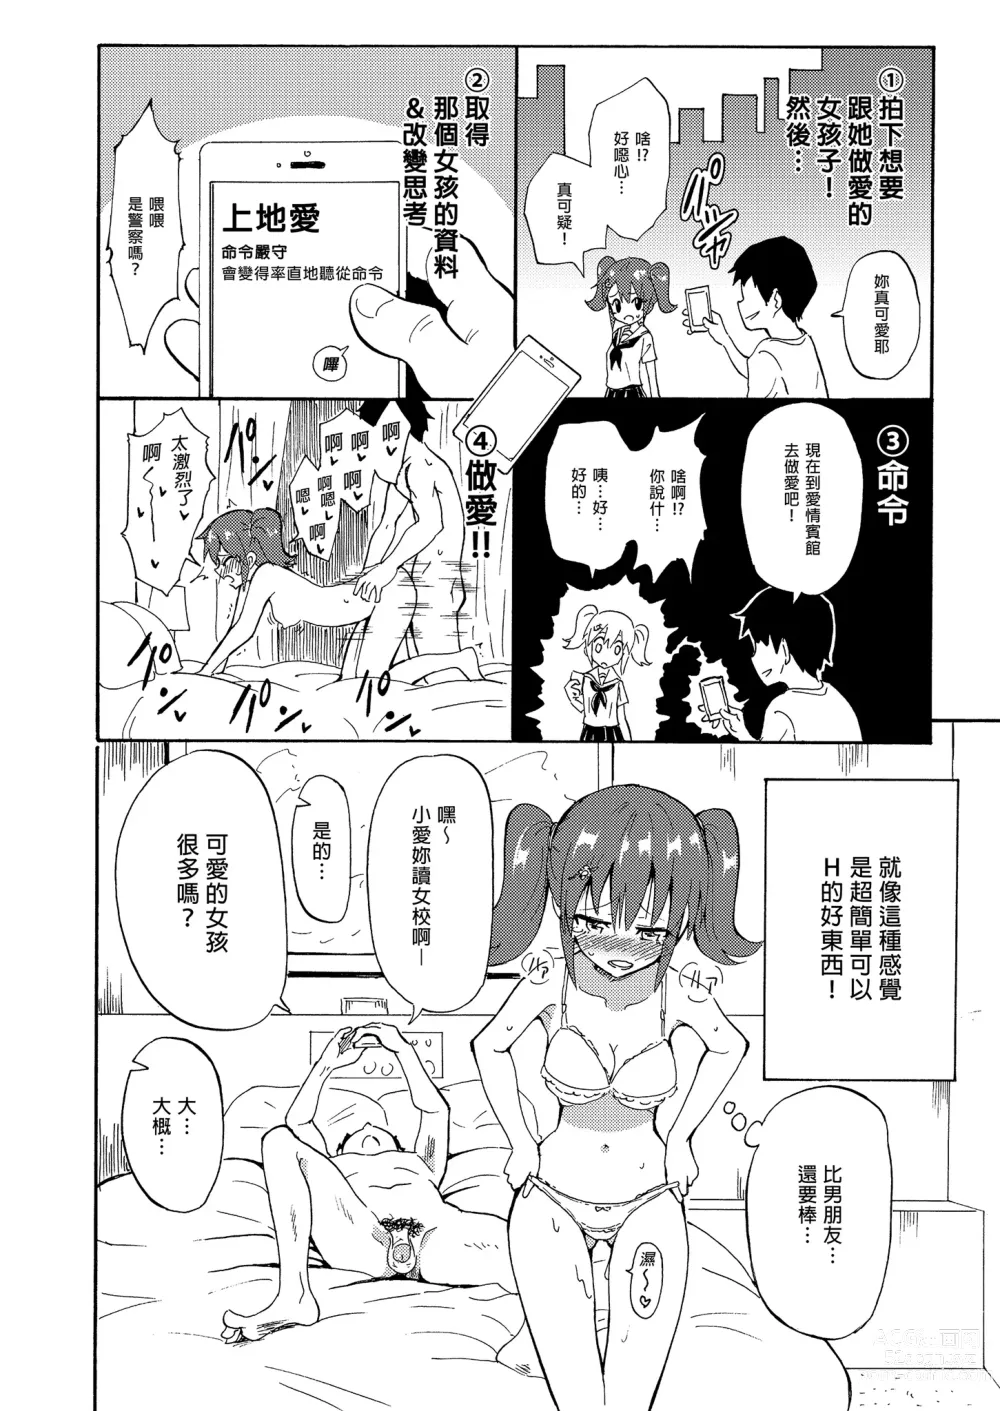 Page 8 of doujinshi _セックススマートフォン～ハーレム学園編総集編～